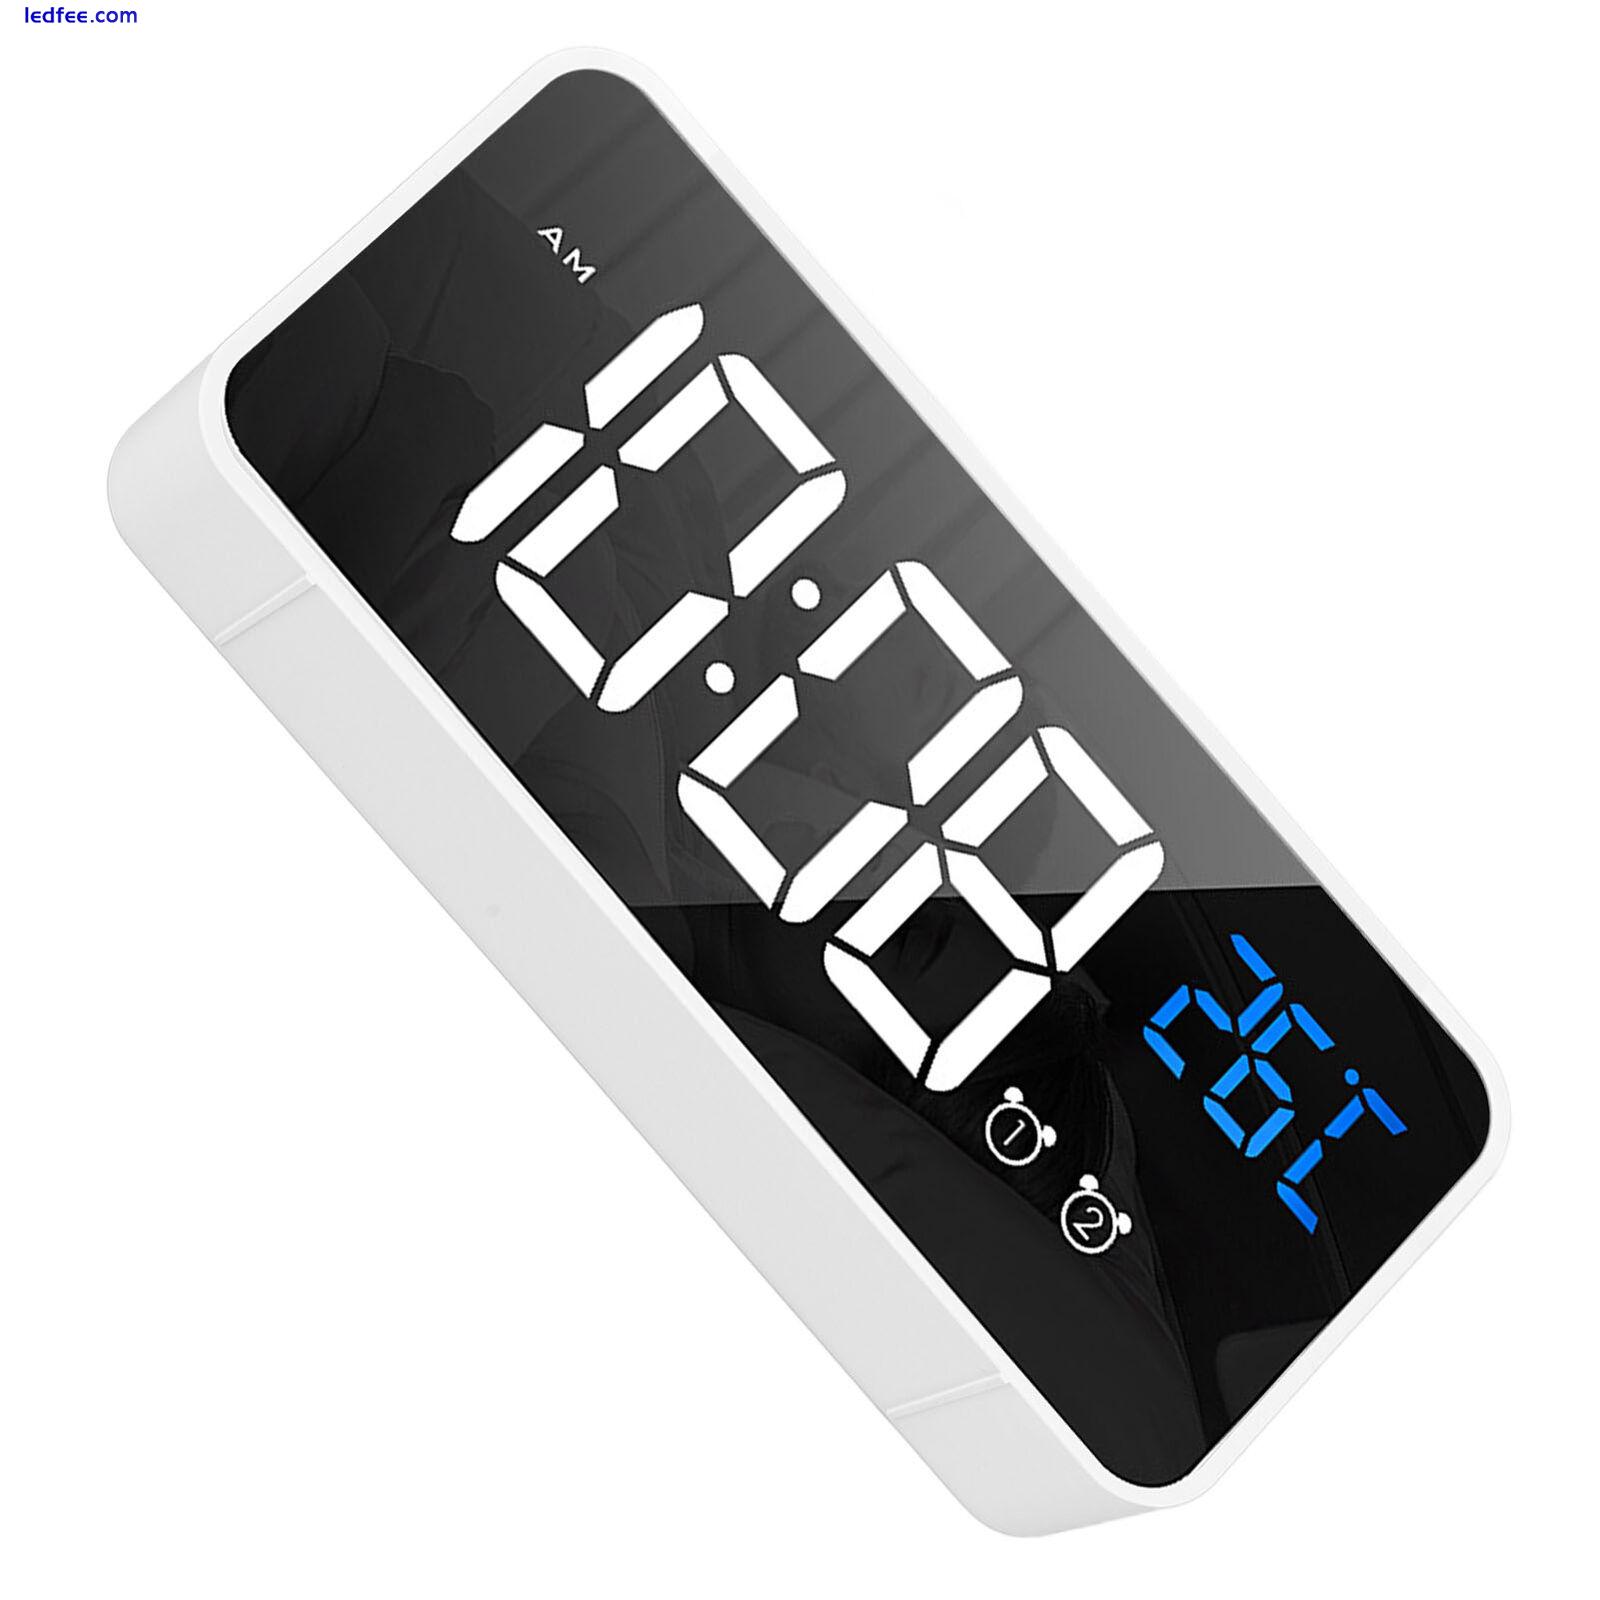 Bedrooms Mirror LED Alarm Clock Rechargeable Voice Activated Clock White TDW 4 